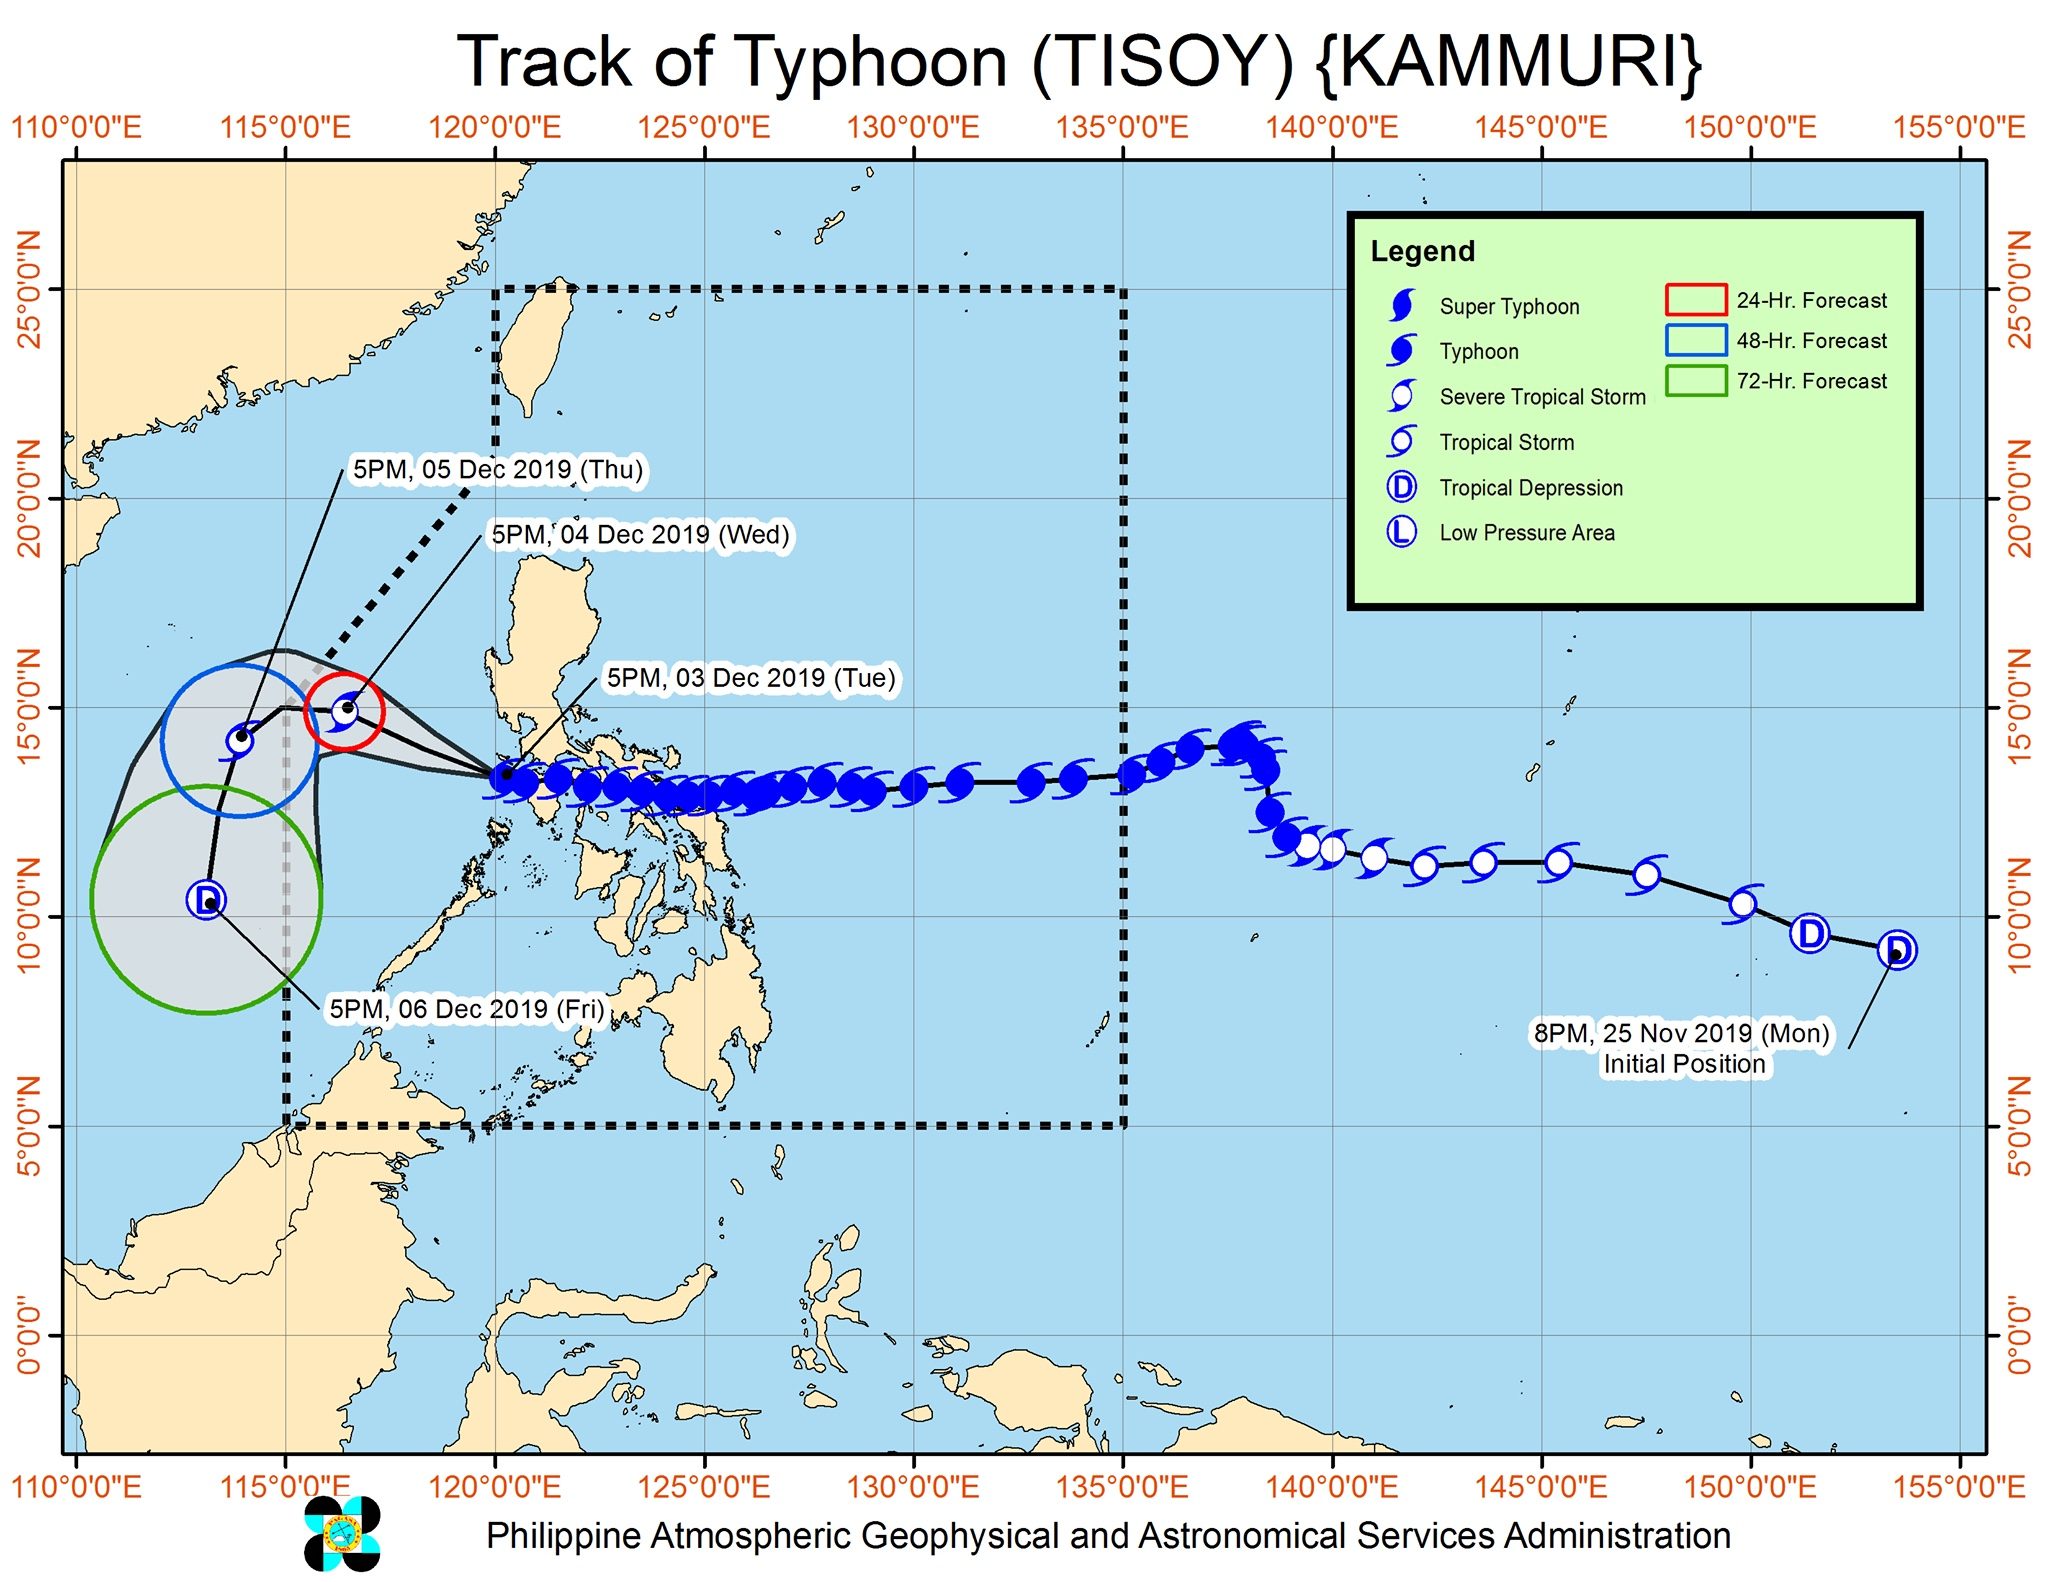 Forecast track of Typhoon Tisoy (Kammuri) as of December 3, 2019, 8 pm. Image from PAGASA 